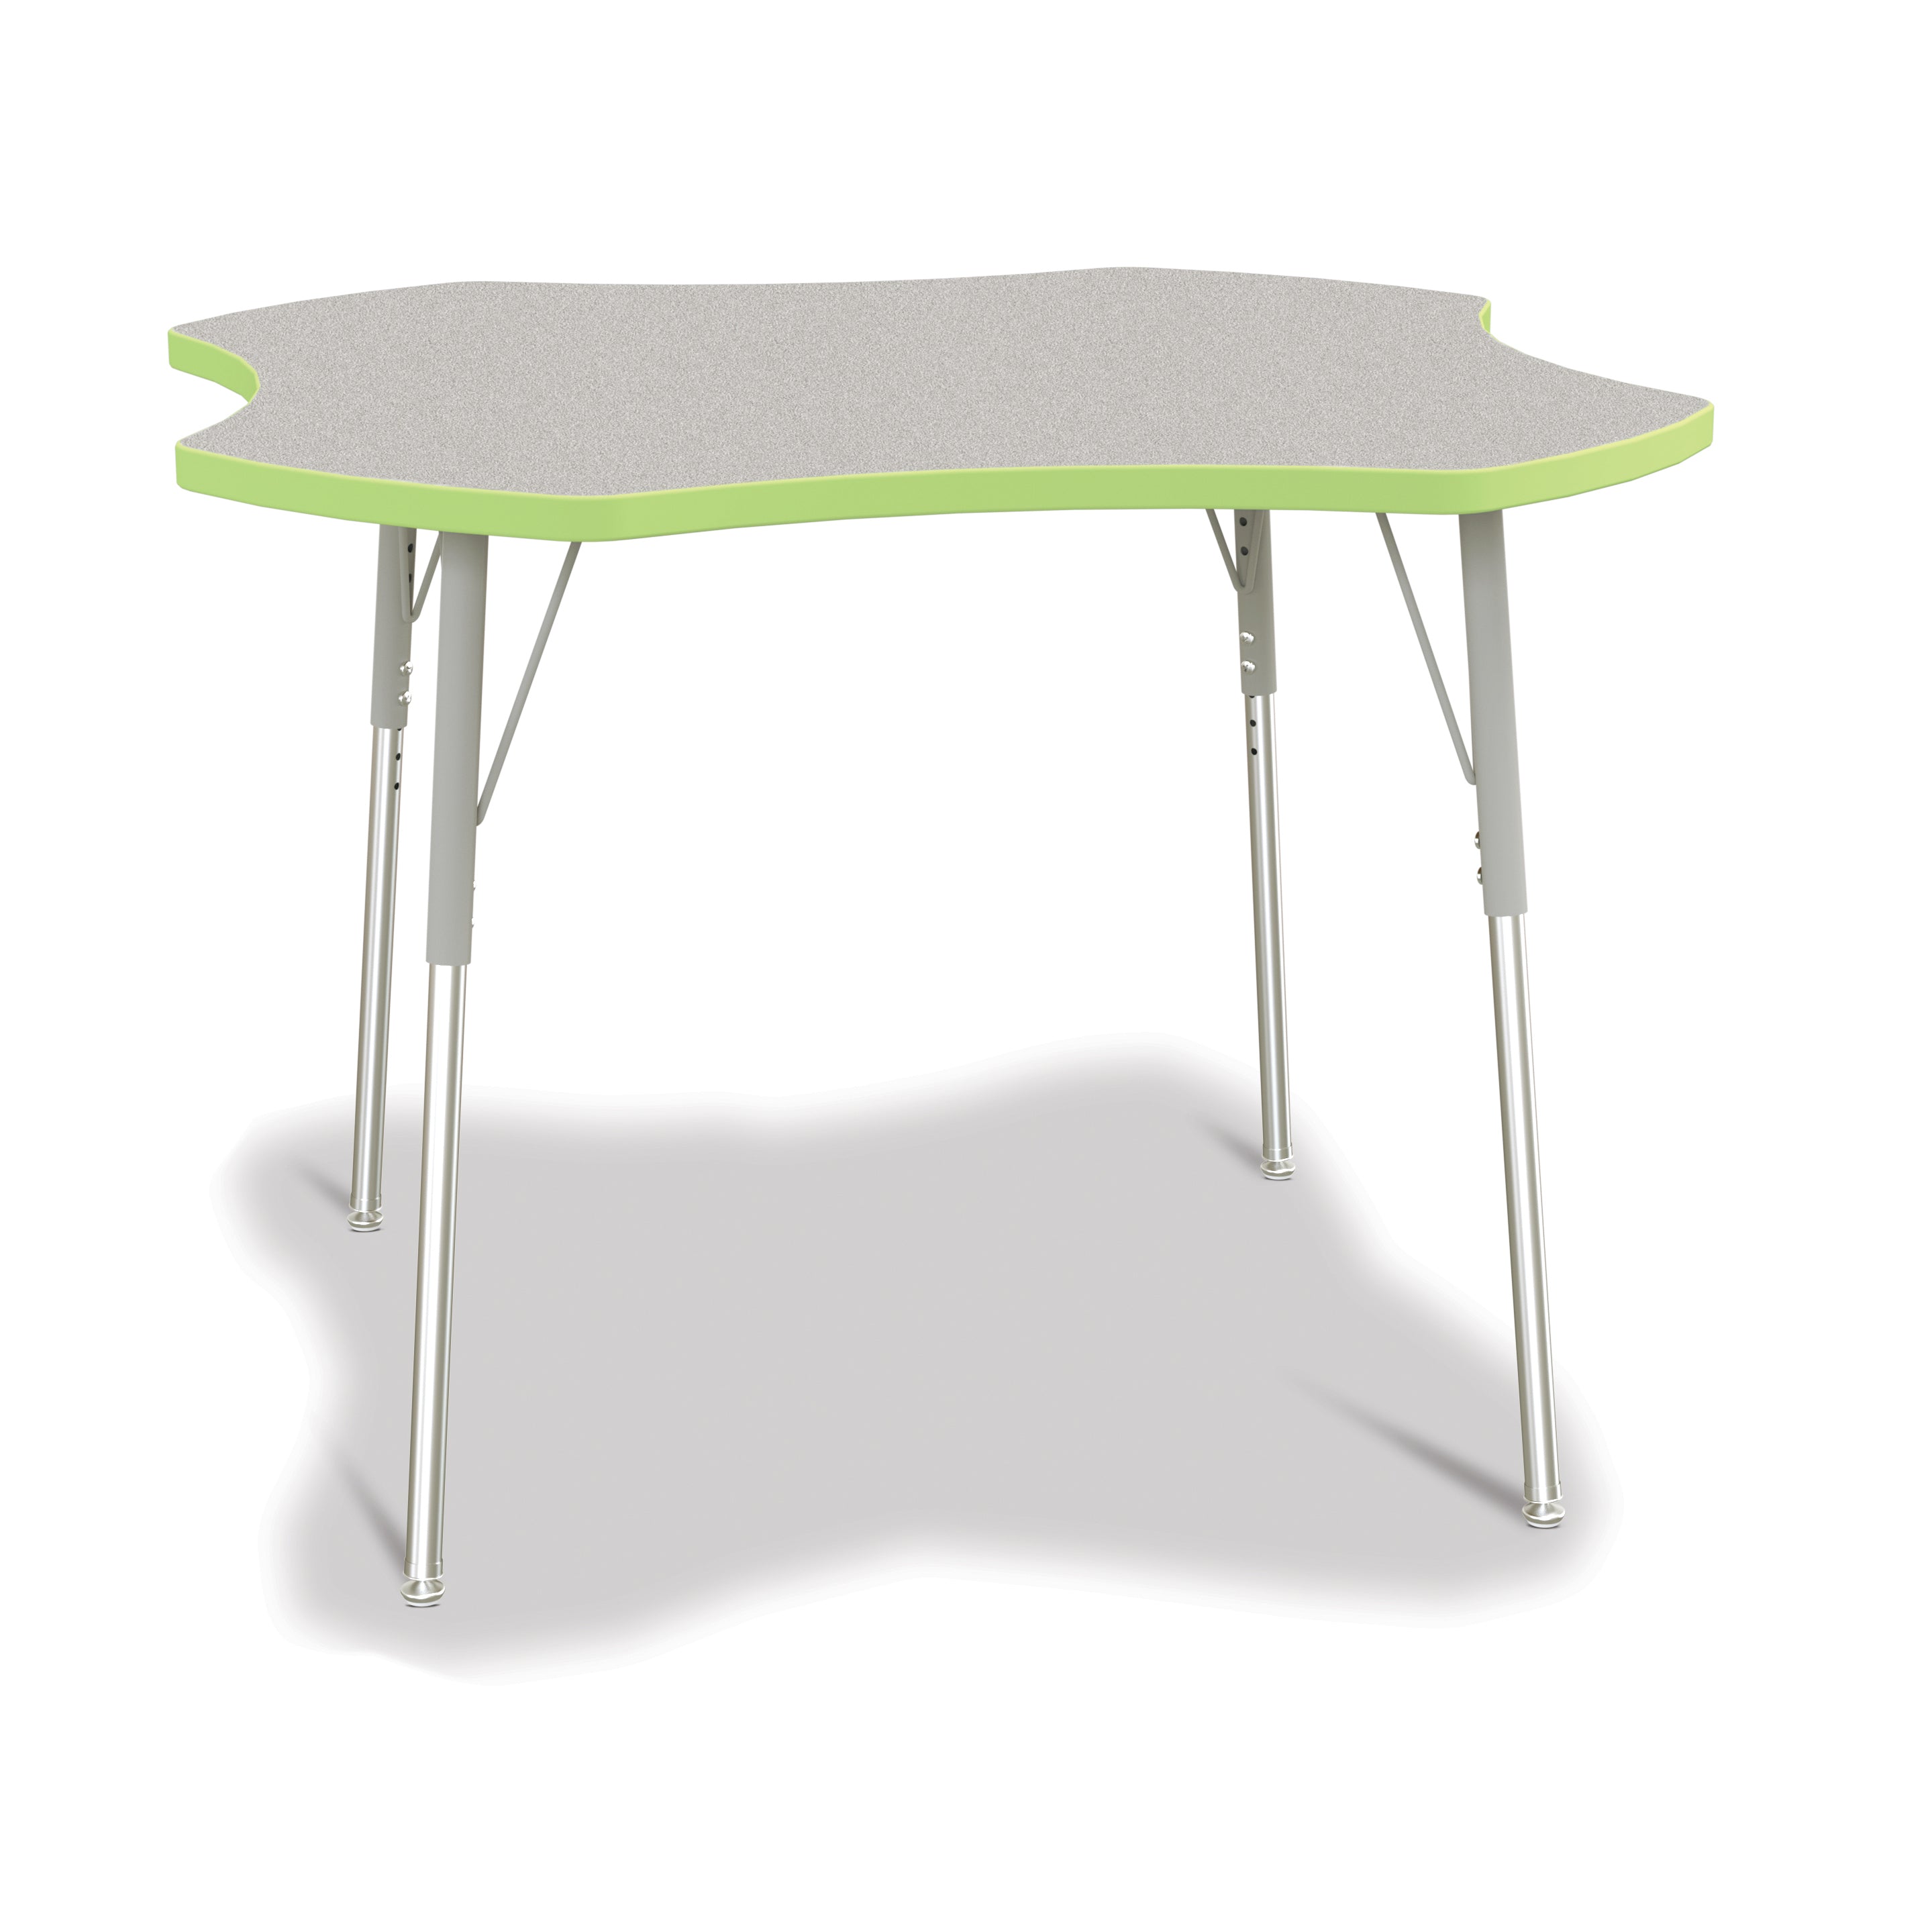 6453JCA130, Berries Four Leaf Activity Table, A-height - Freckled Gray/Key Lime/Gray